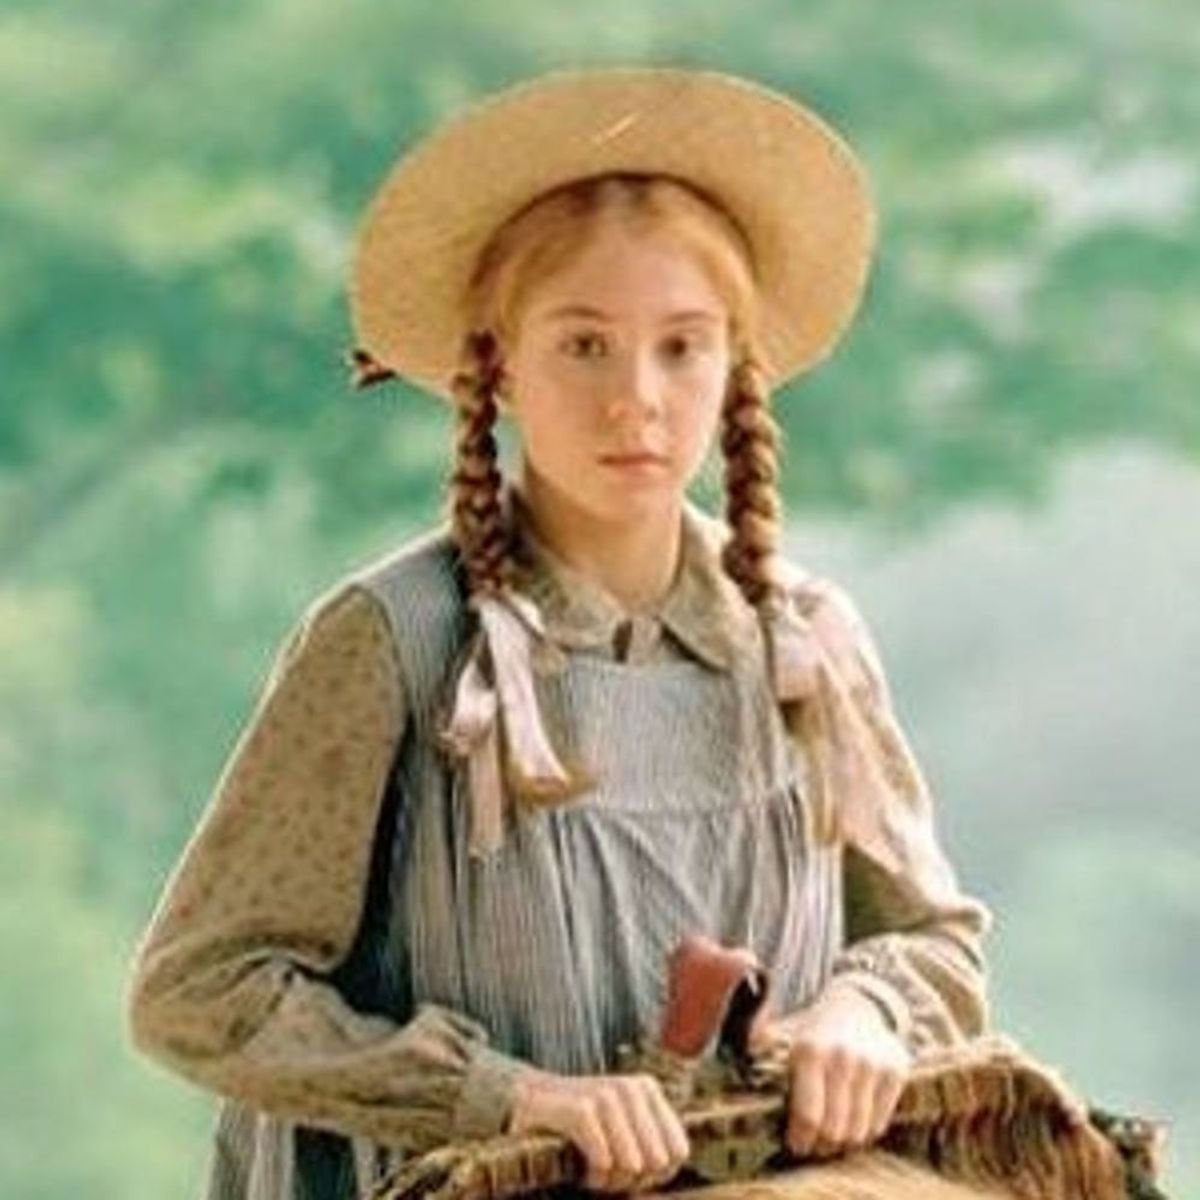 Meet the Young Actress Who Will Be the New Anne of Green Gables